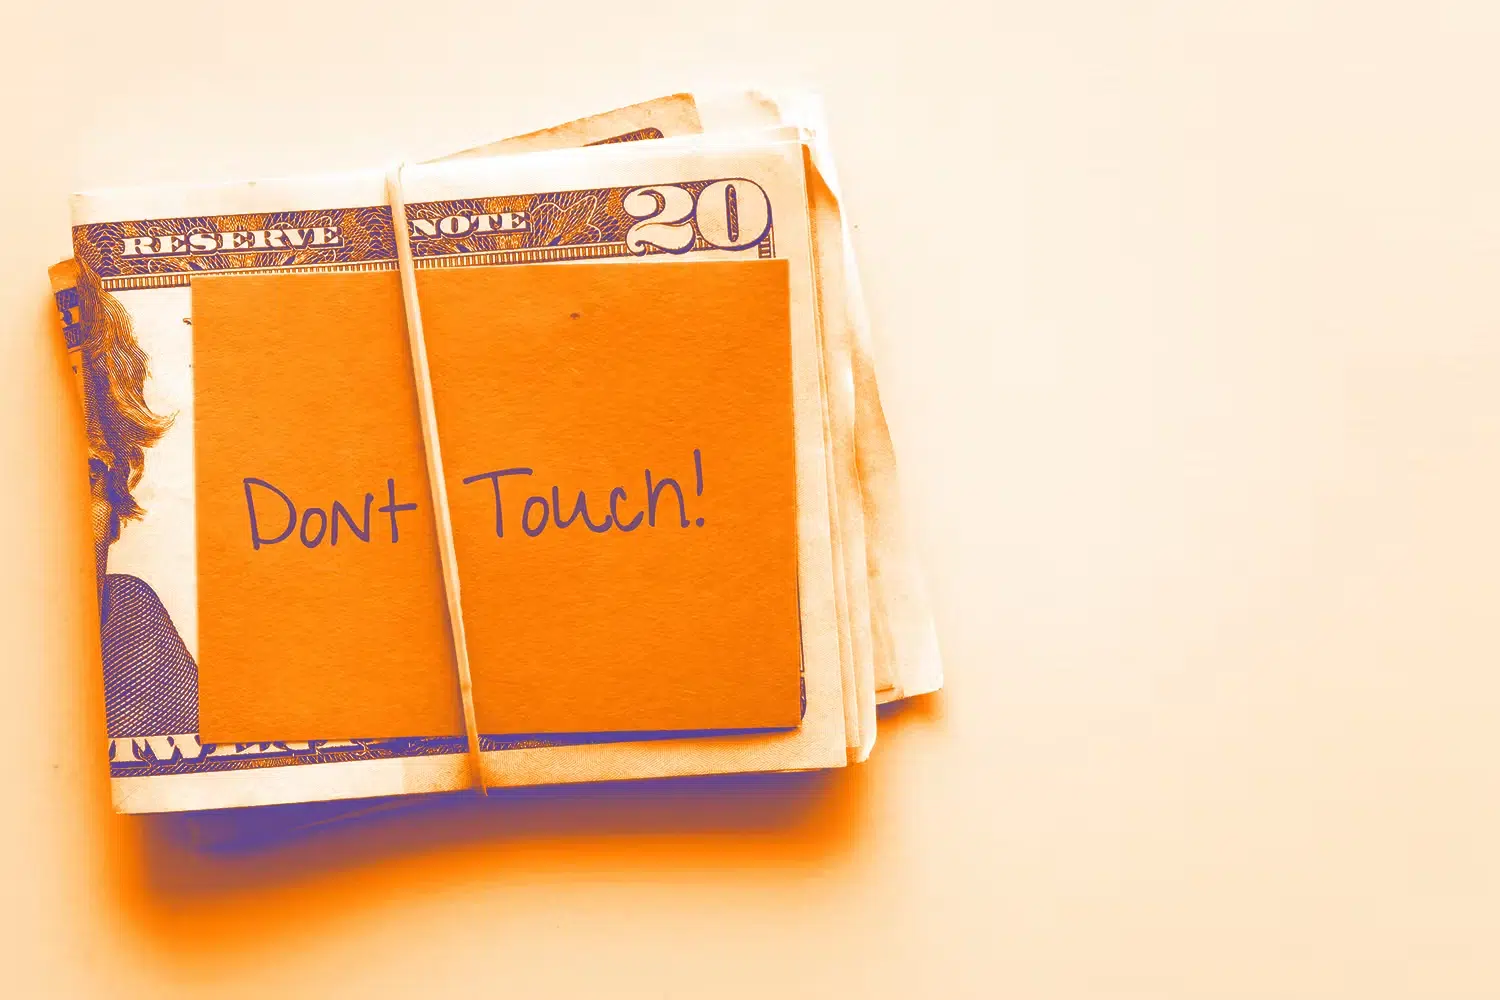 Money in rubber band with note reading "don't touch"